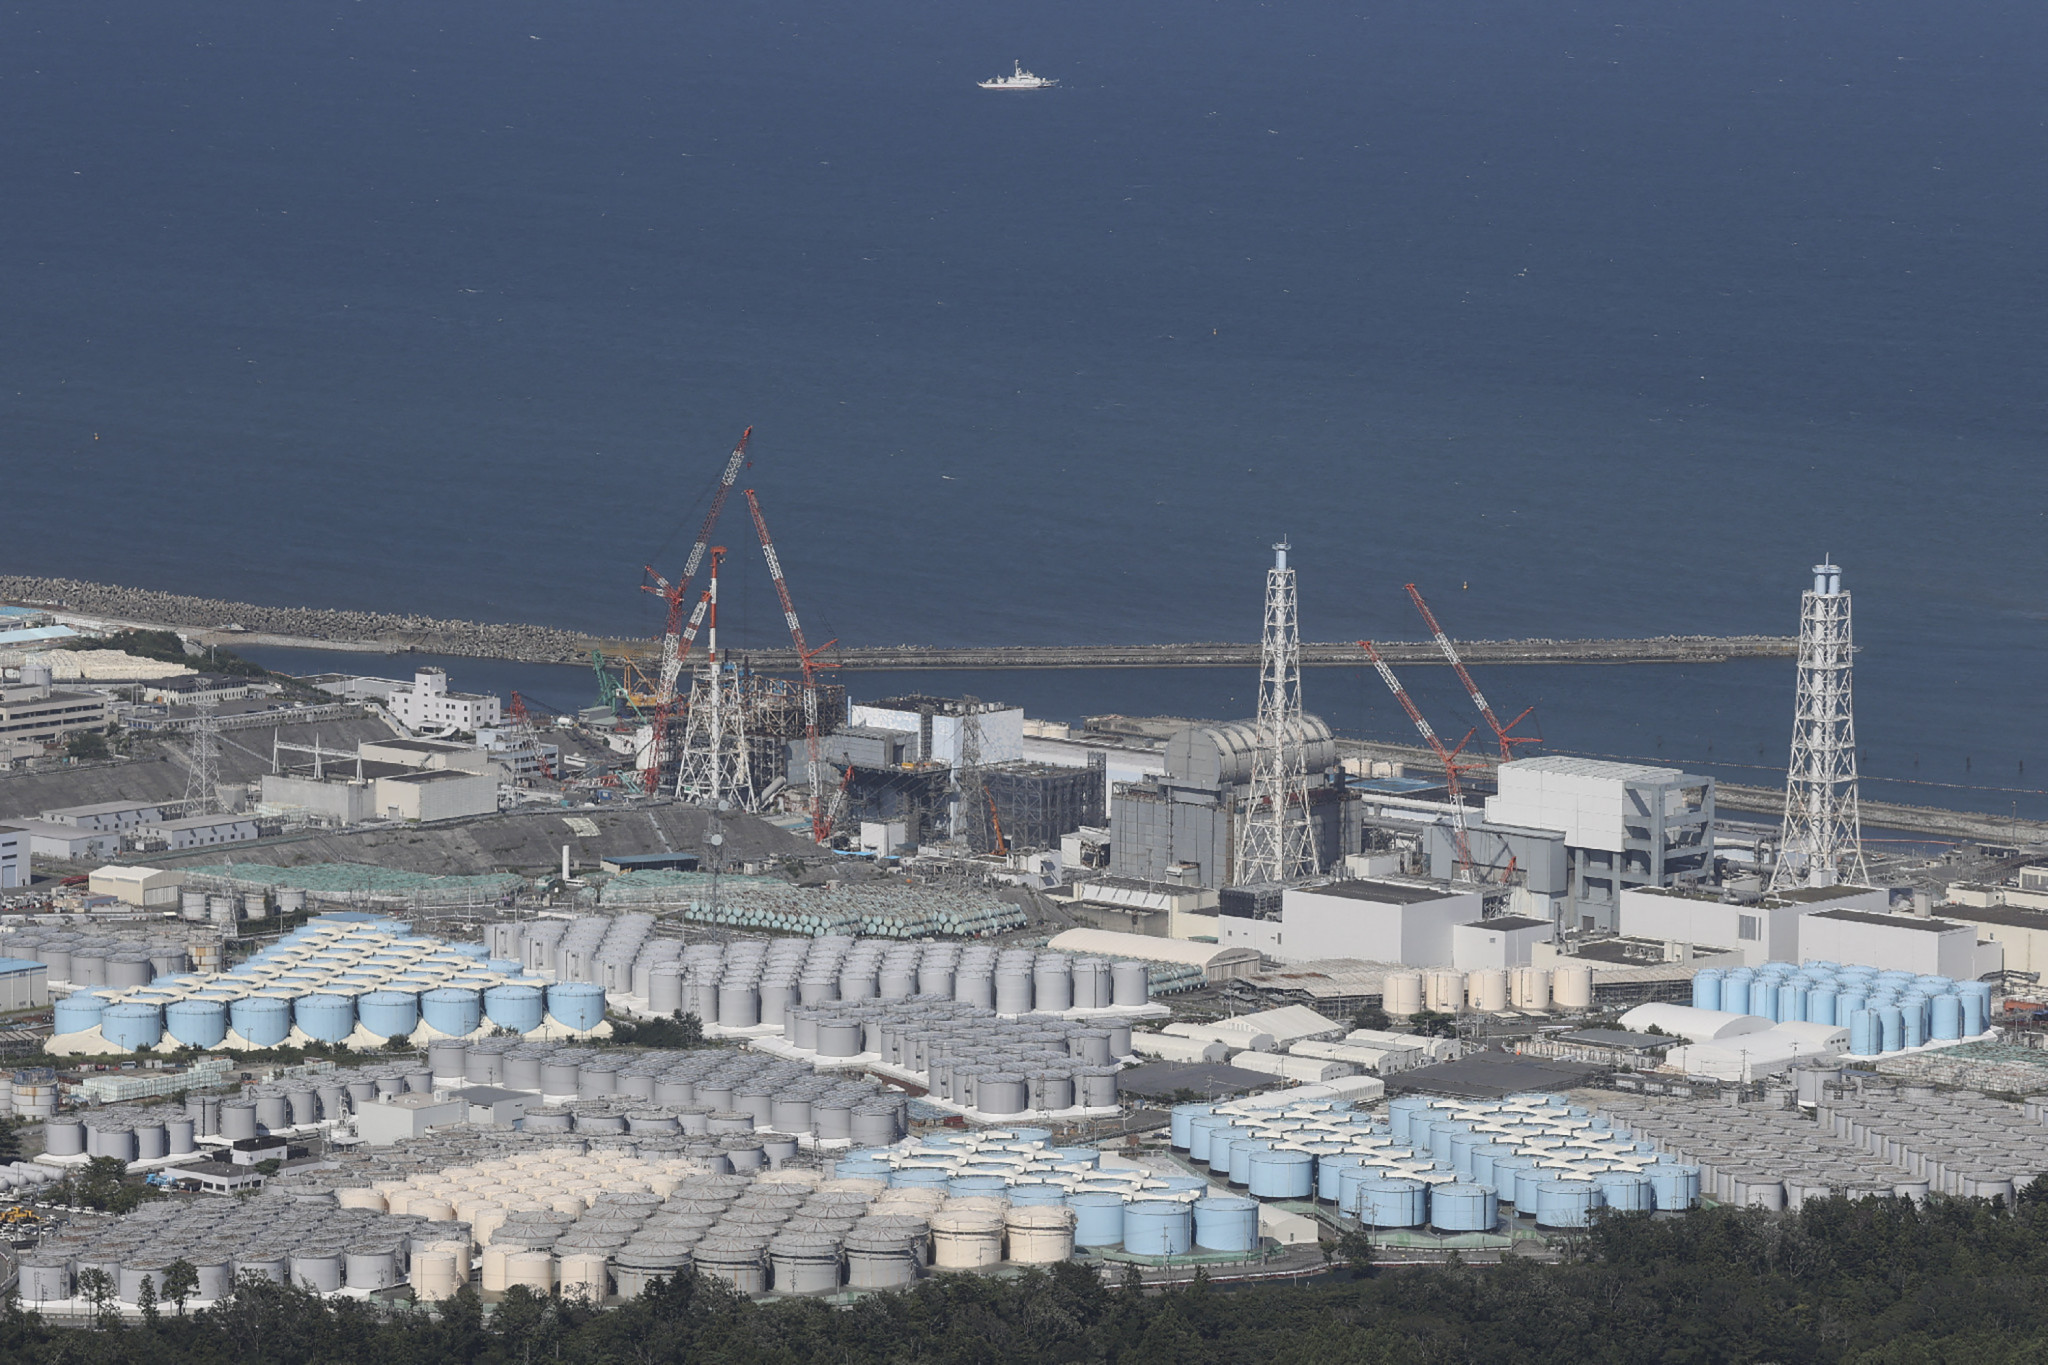 A diplomatic row has erupted between China and Japan less than a month before the start of the Asian Games after Tokyo sanctioned the release of release radioactive water from the Fukushima nuclear power plant into the sea ©Getty Images